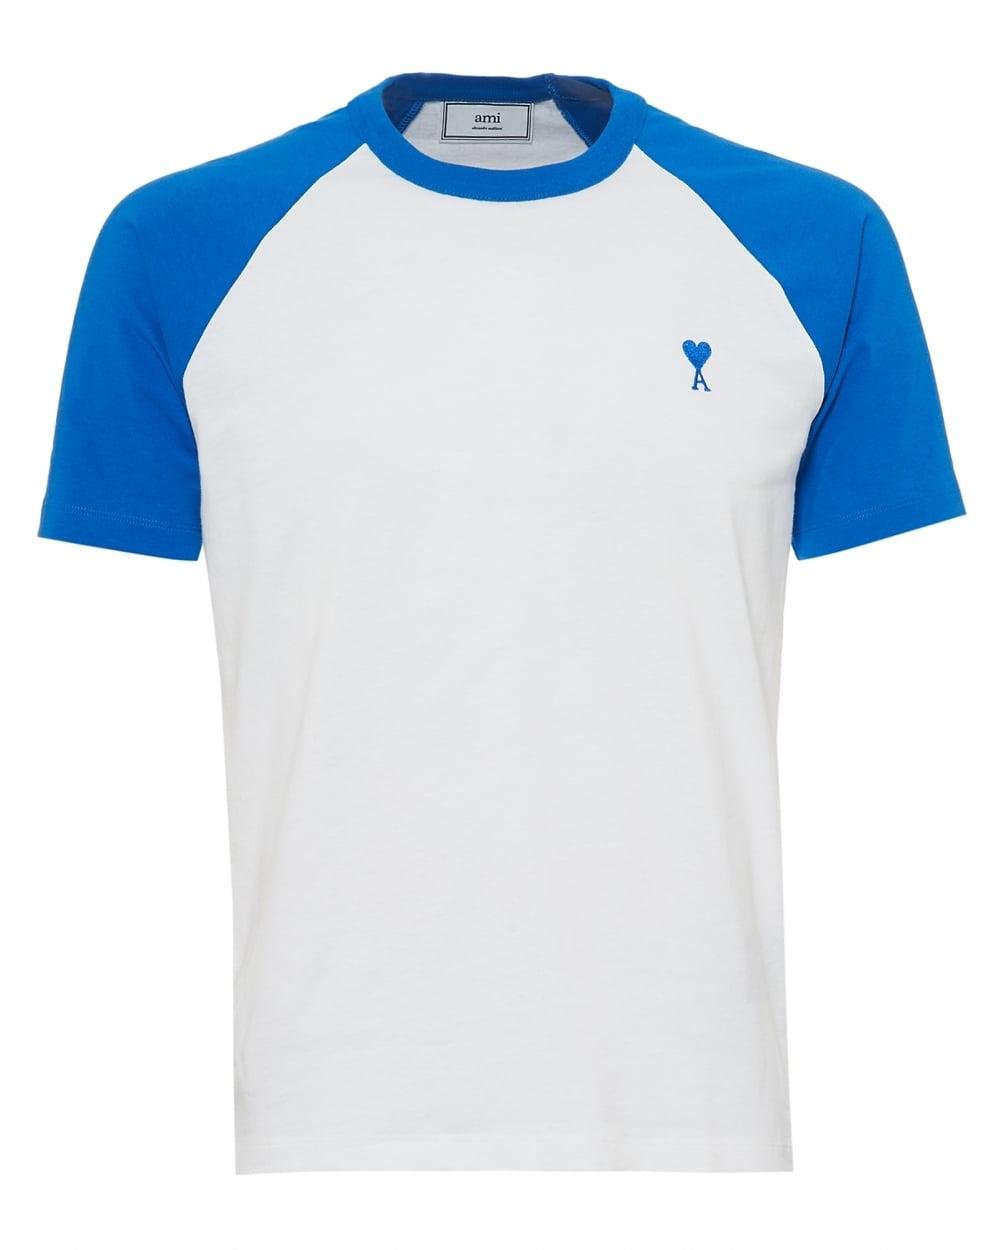 White and Blue T Logo - Ami Mens Contrast Shoulders T Shirt, Plain Body White Blue Tee